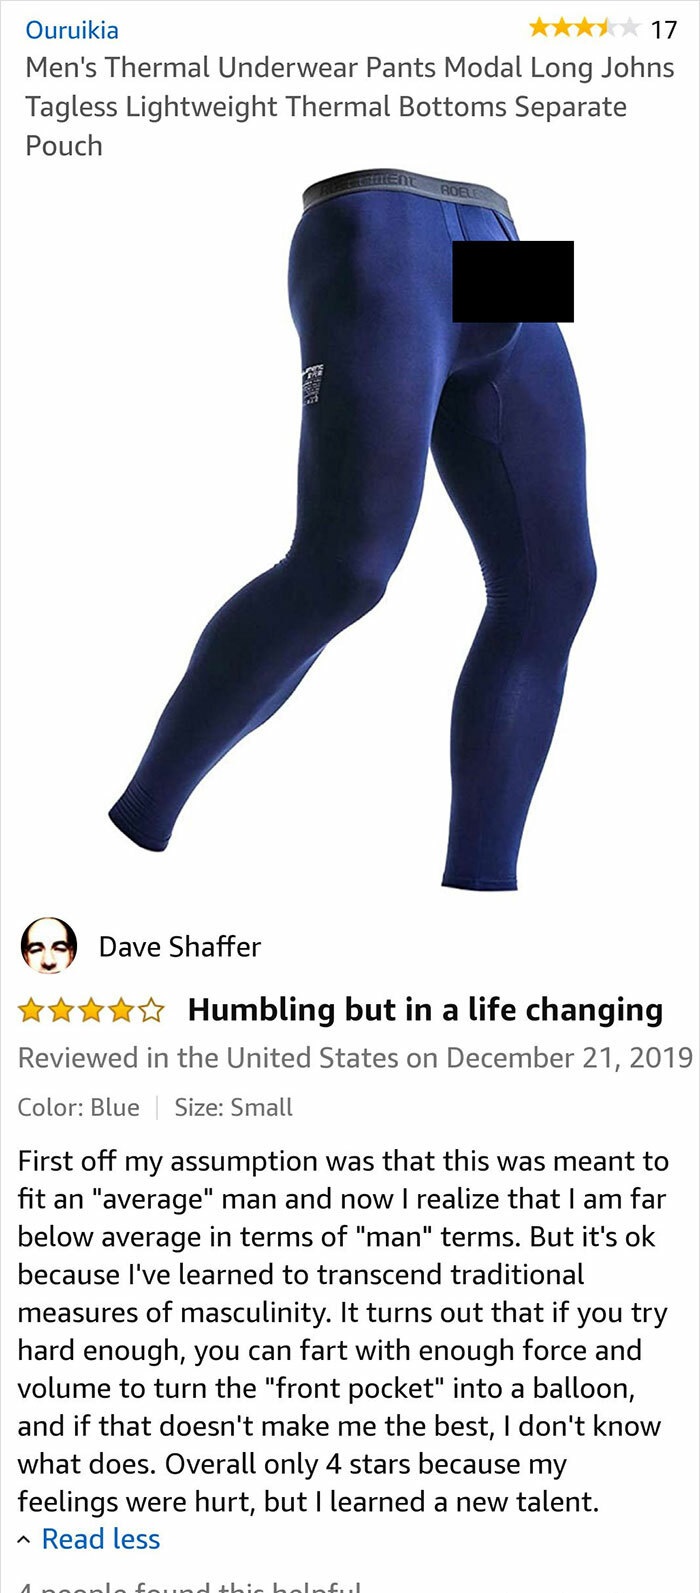 funny amazon reviews - Men's Thermal Underwear Pants - Humbling but in a life changing way - First off my assumption was that